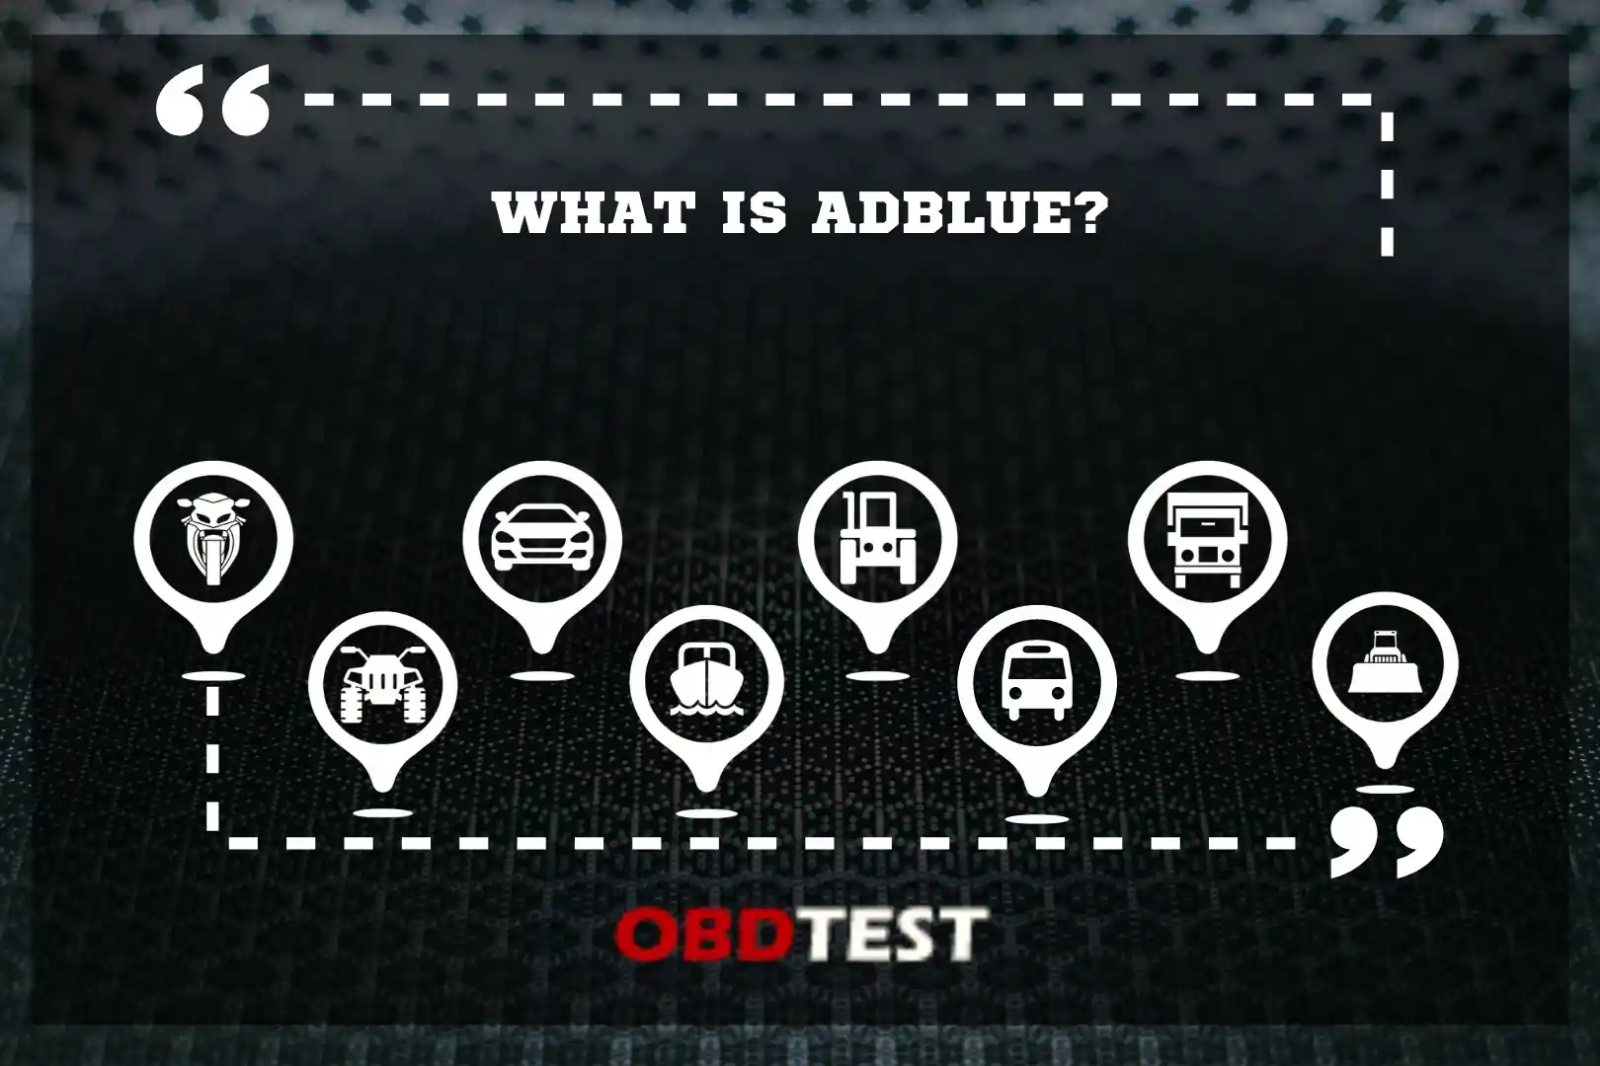 What is Adblue?